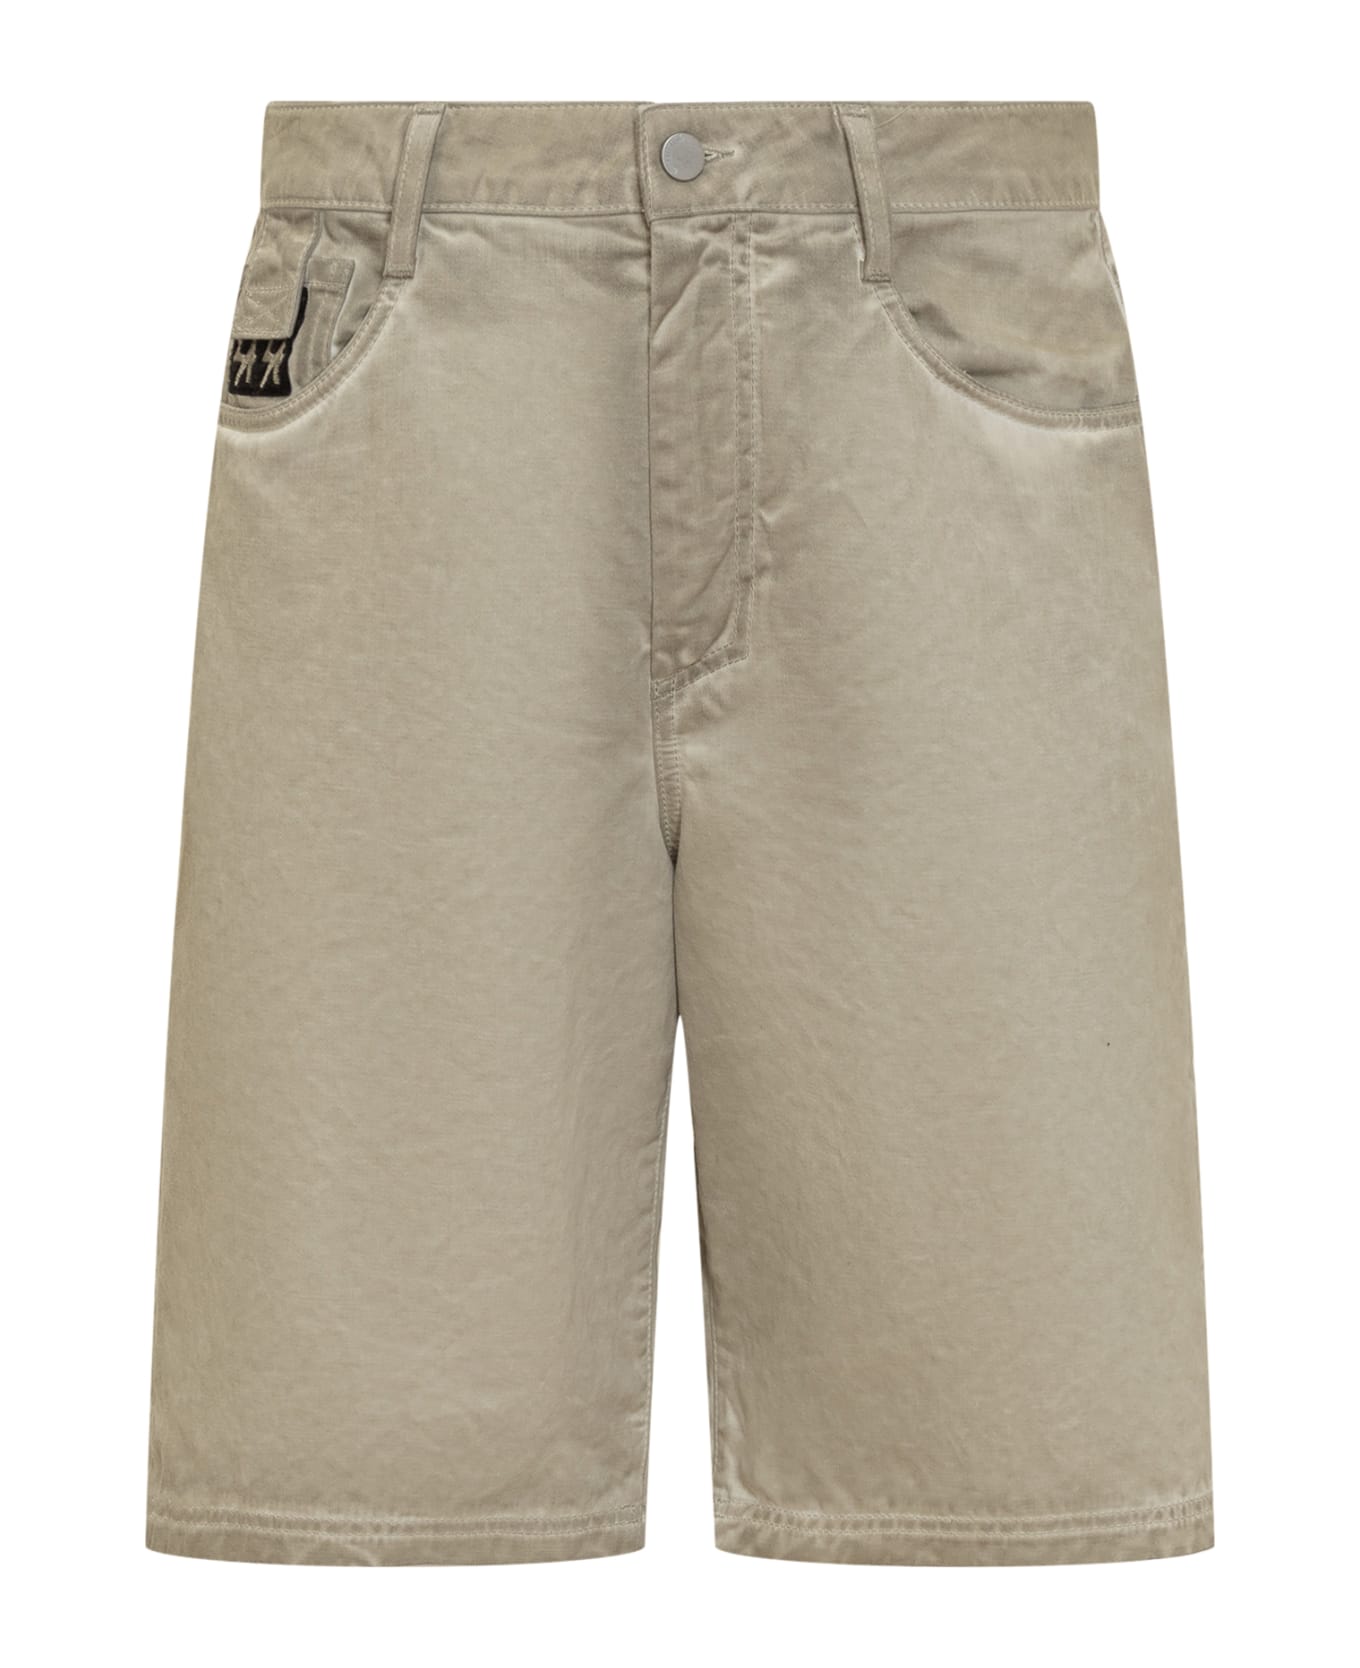 44 Label Group Shorts With Logo - SAND